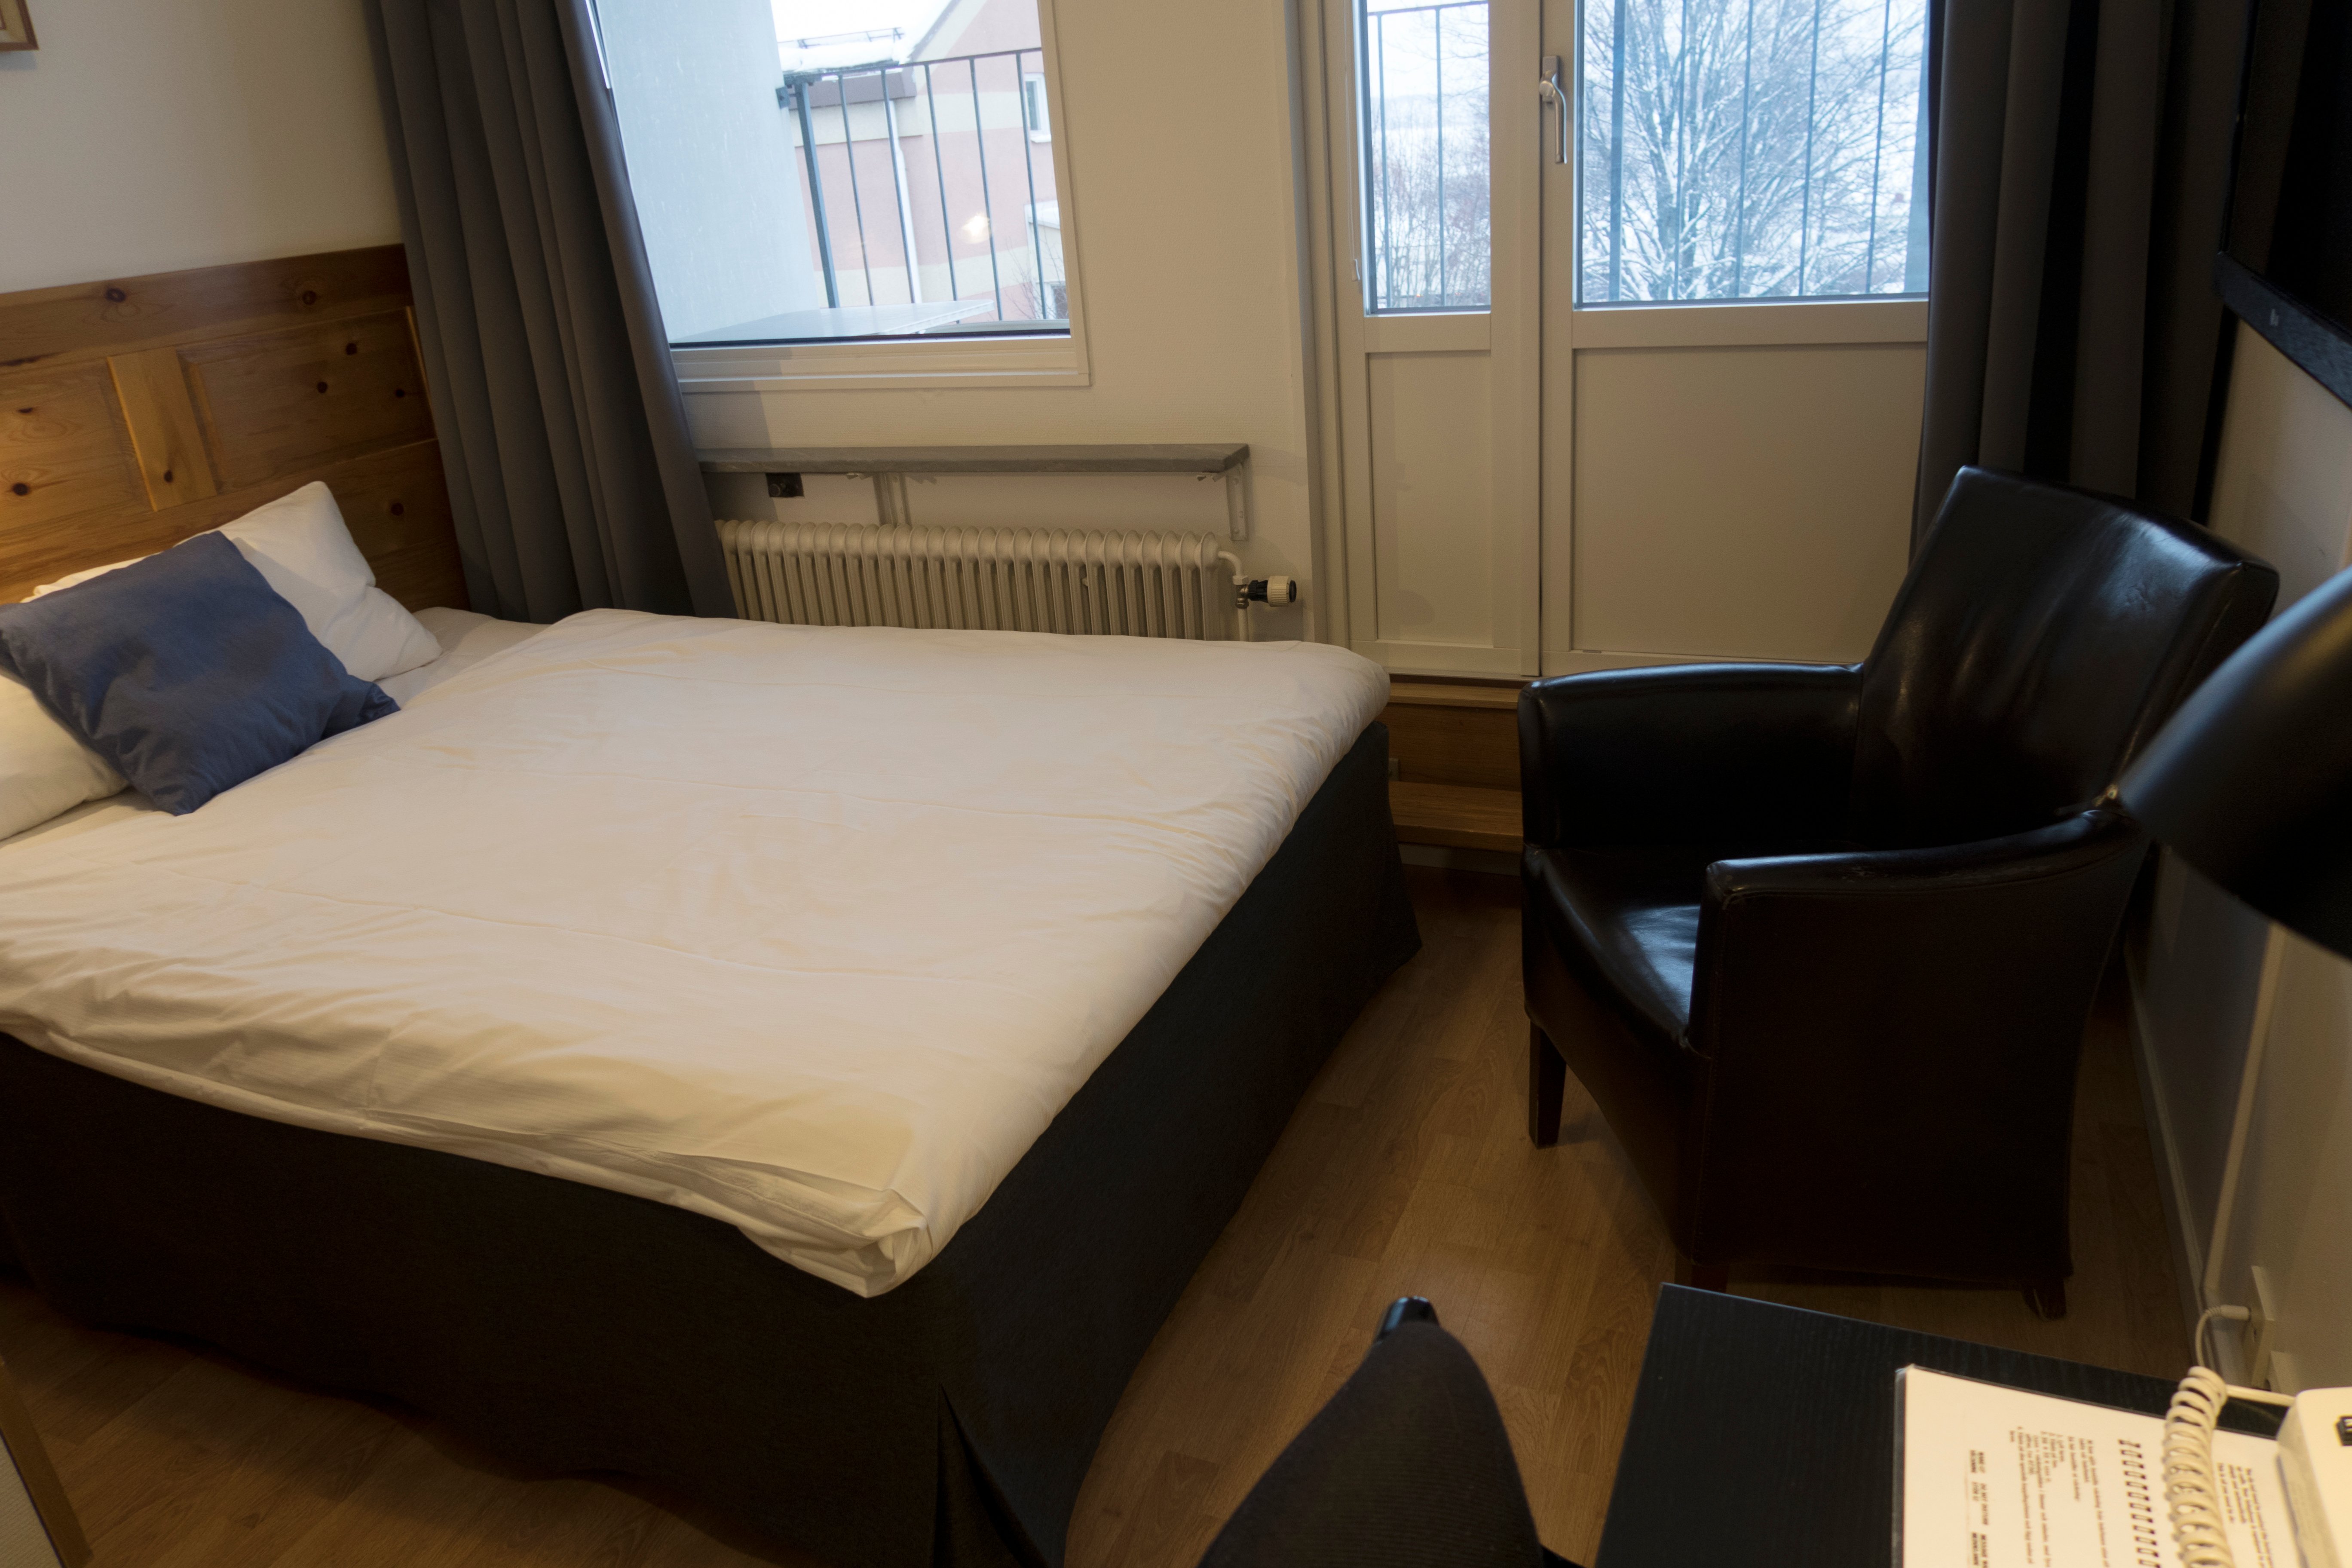 Hotel room with beds, black leather armchair and balcony